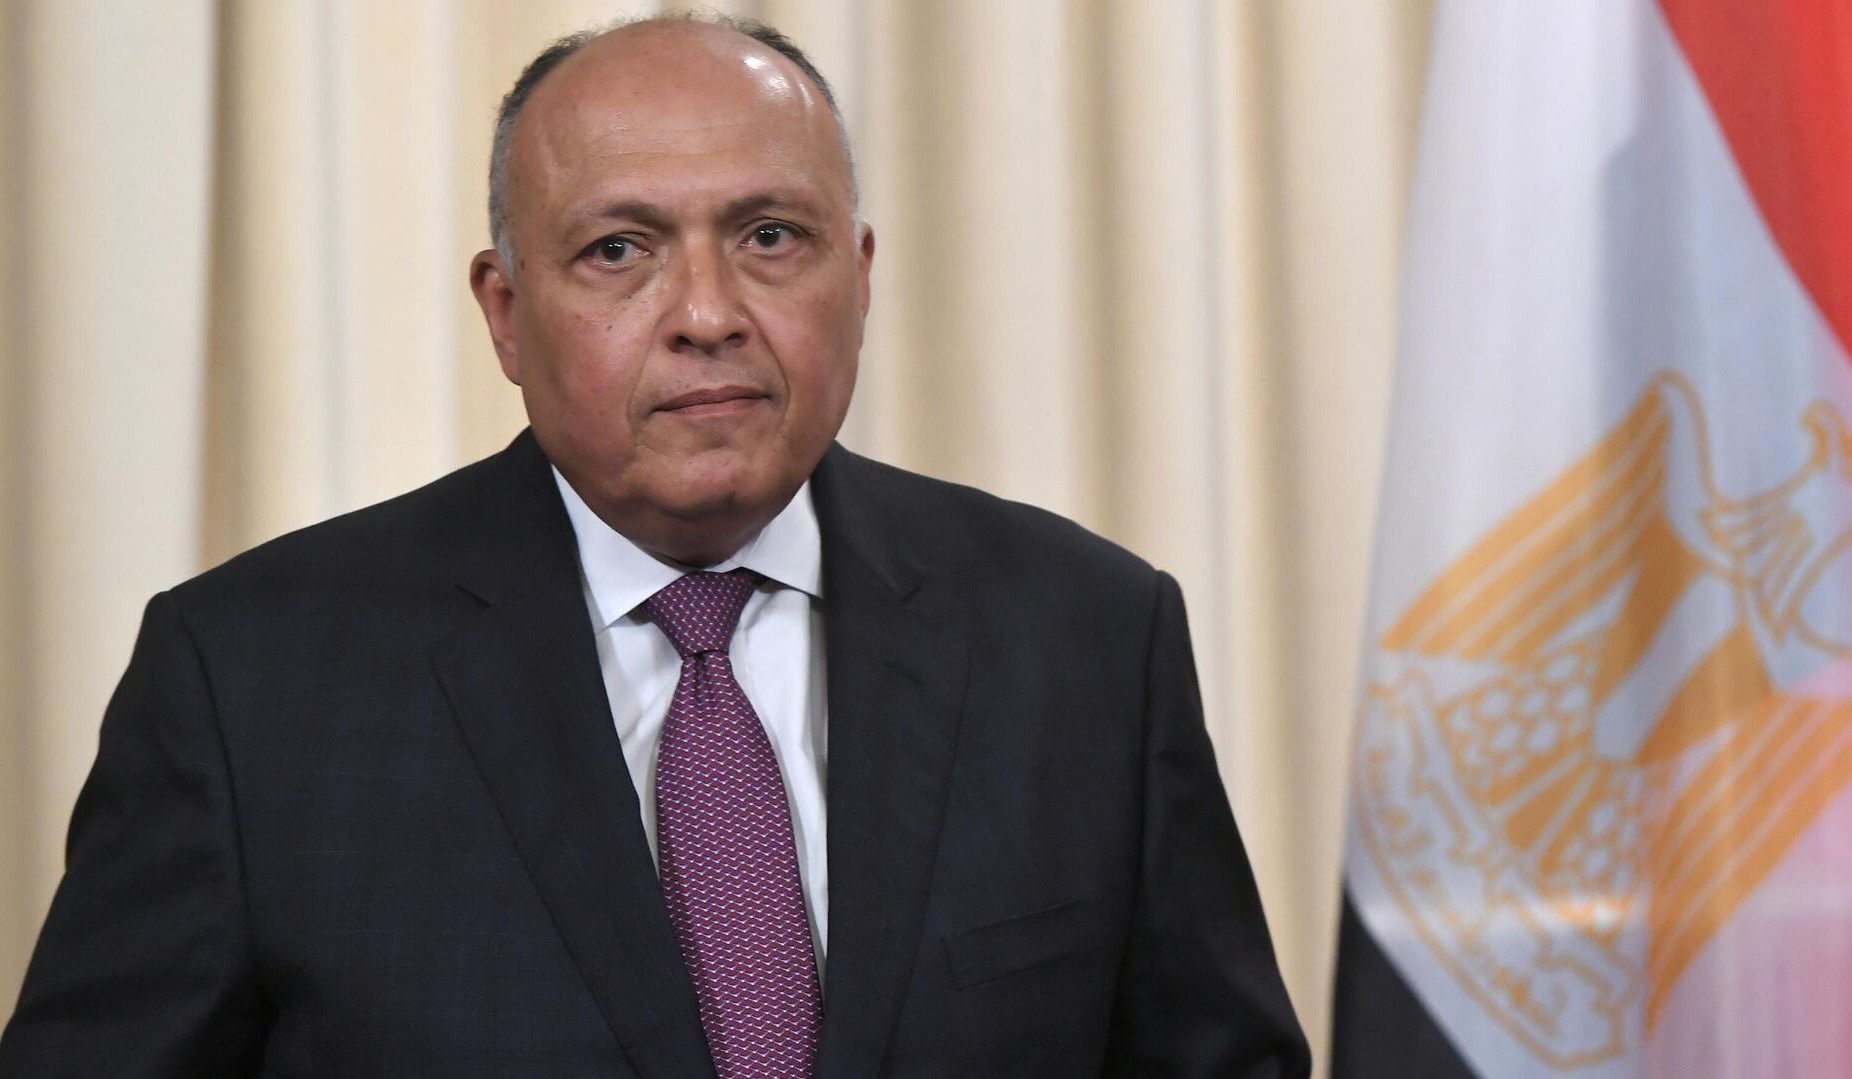 Egypt stands for restoration of Damascus' sovereignty over entire territory of Syria: Shukri